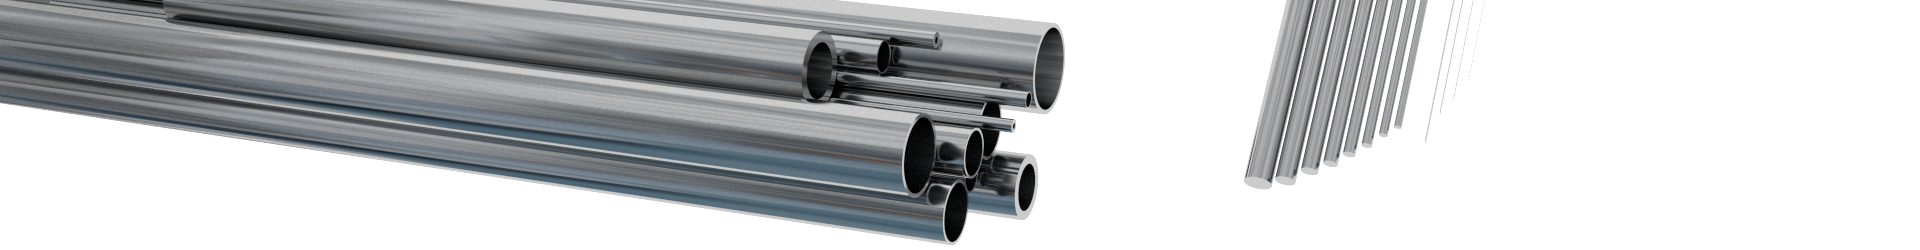 Precision Tubing and Wire - Unimed S.A. - Swiss precision serving life  sciences - Medical Needles - Sampling probes - Diagnostic cannulas -  Precision stainless steel tubing - Gauge - Conversion tables